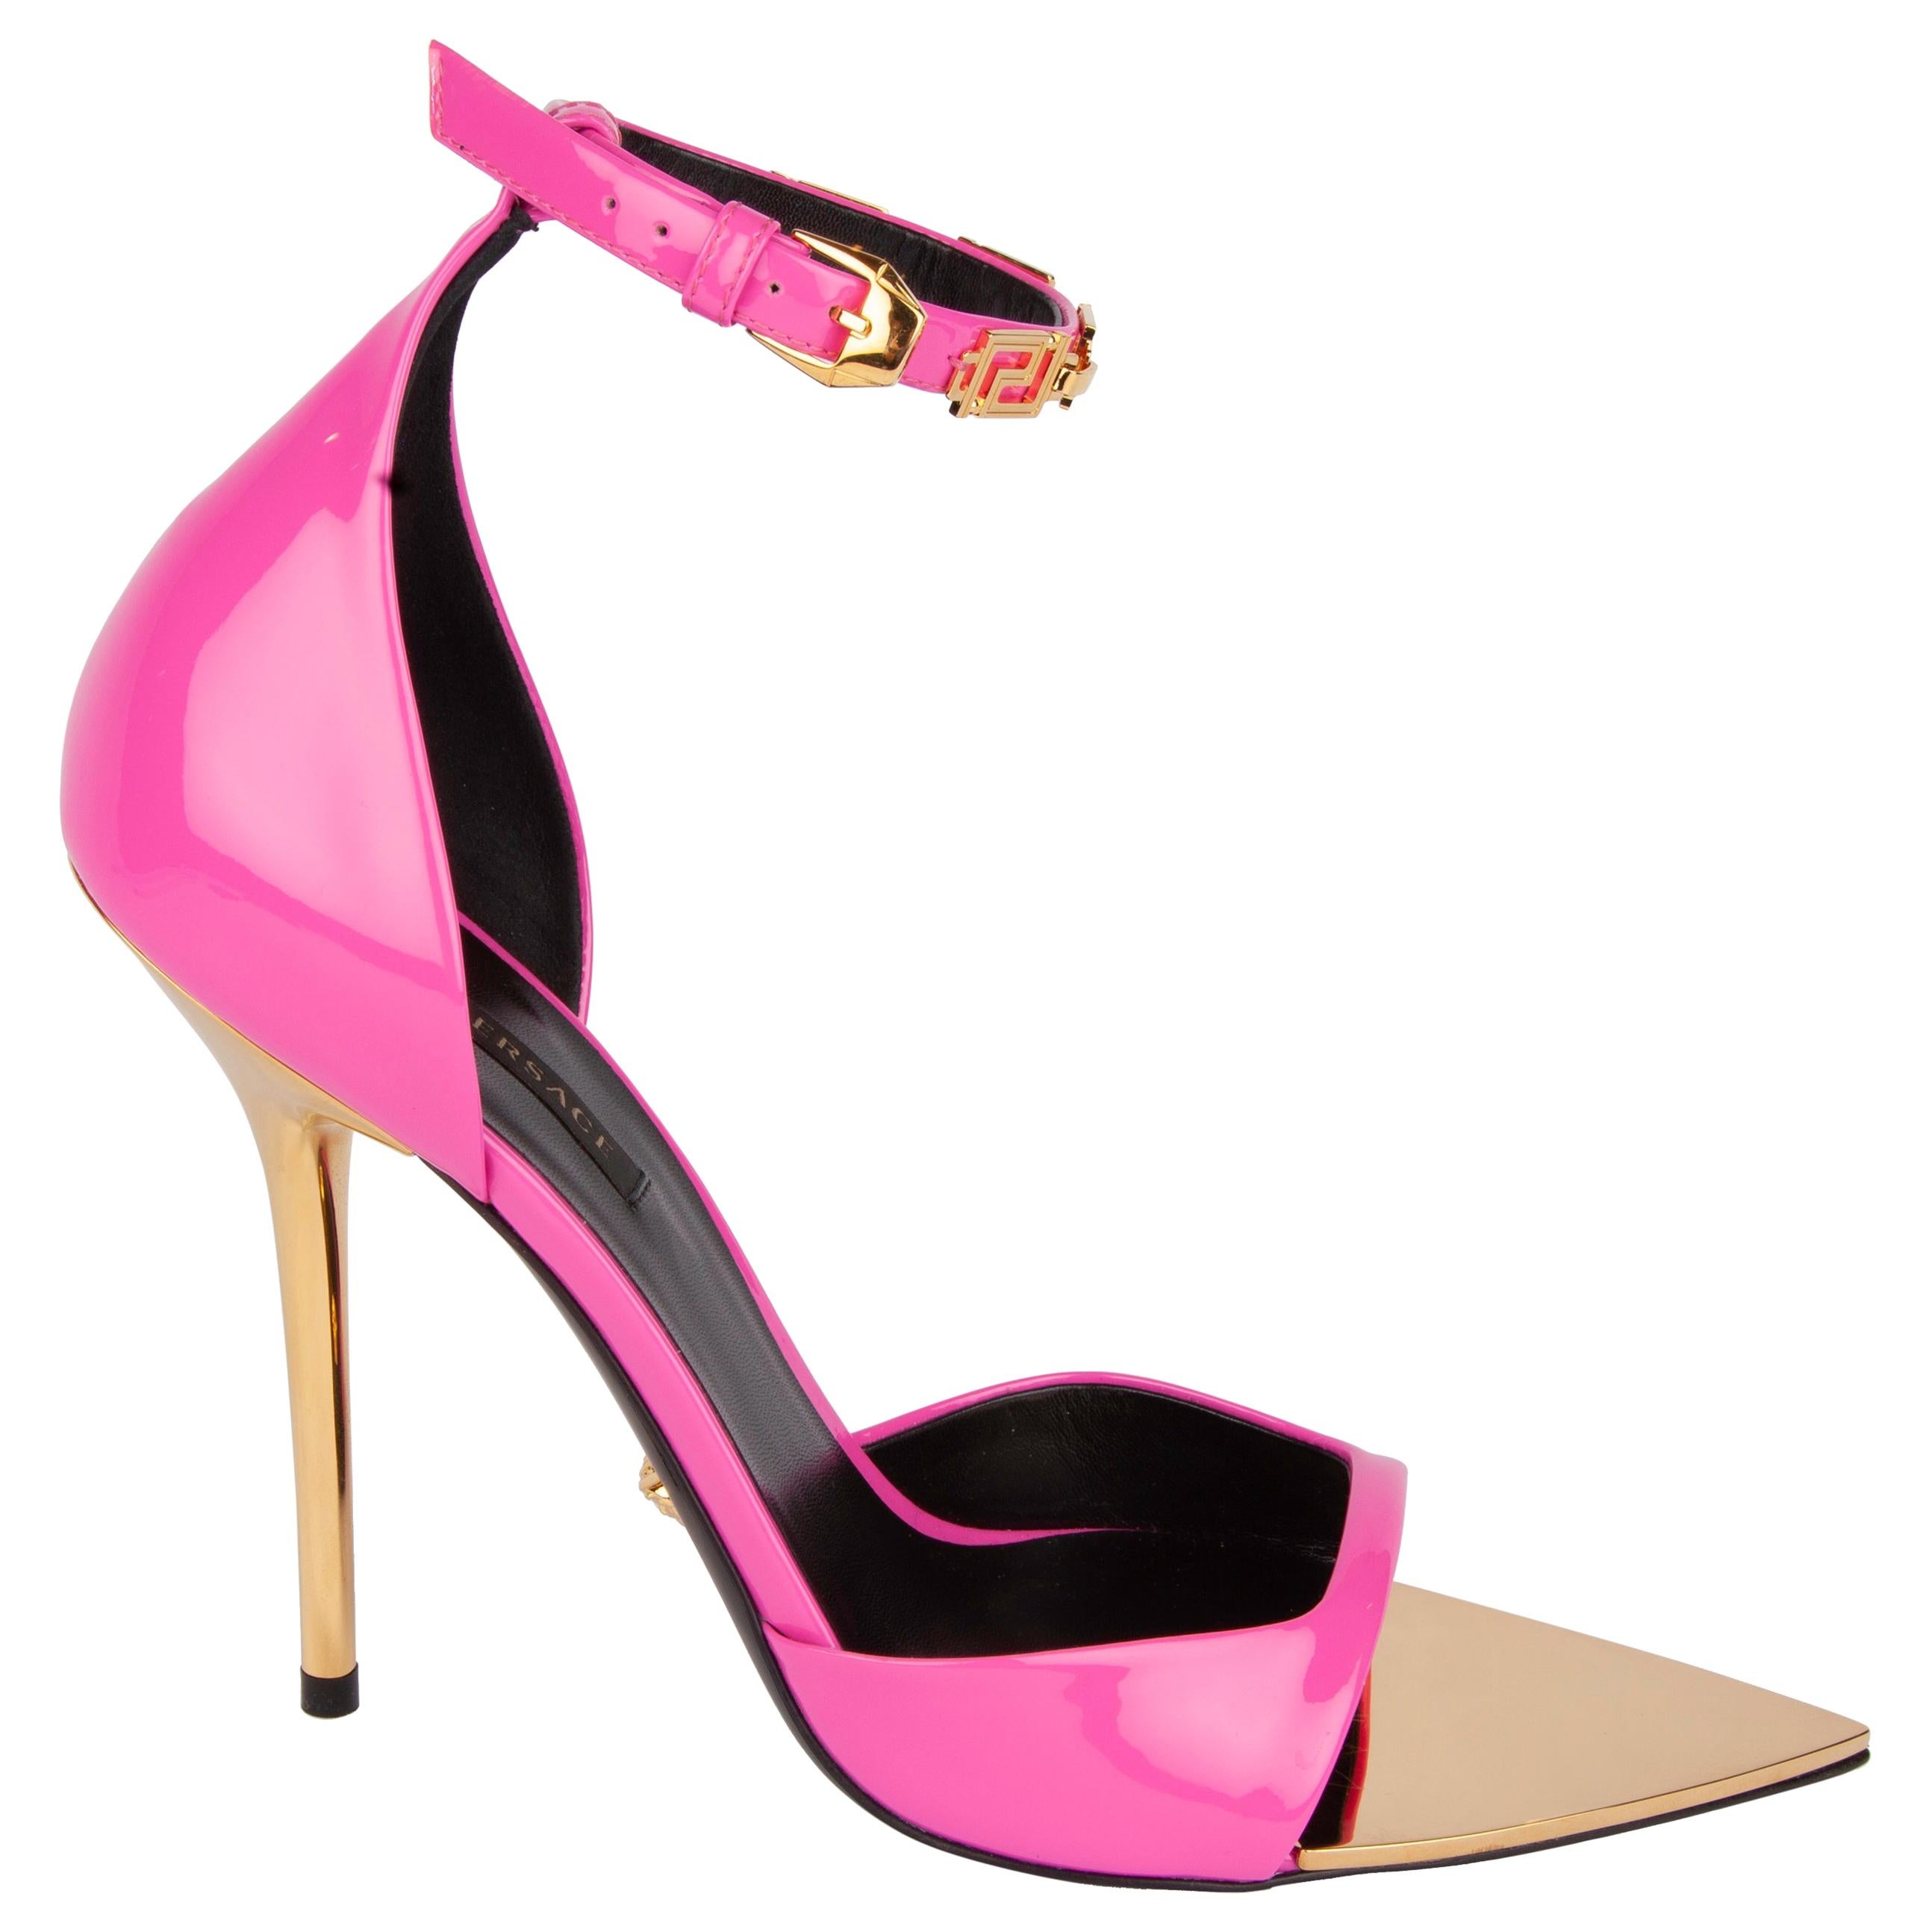 Versace Hot Pink Patent Leather Strap Heels with Gold Tone Hardware Size 39